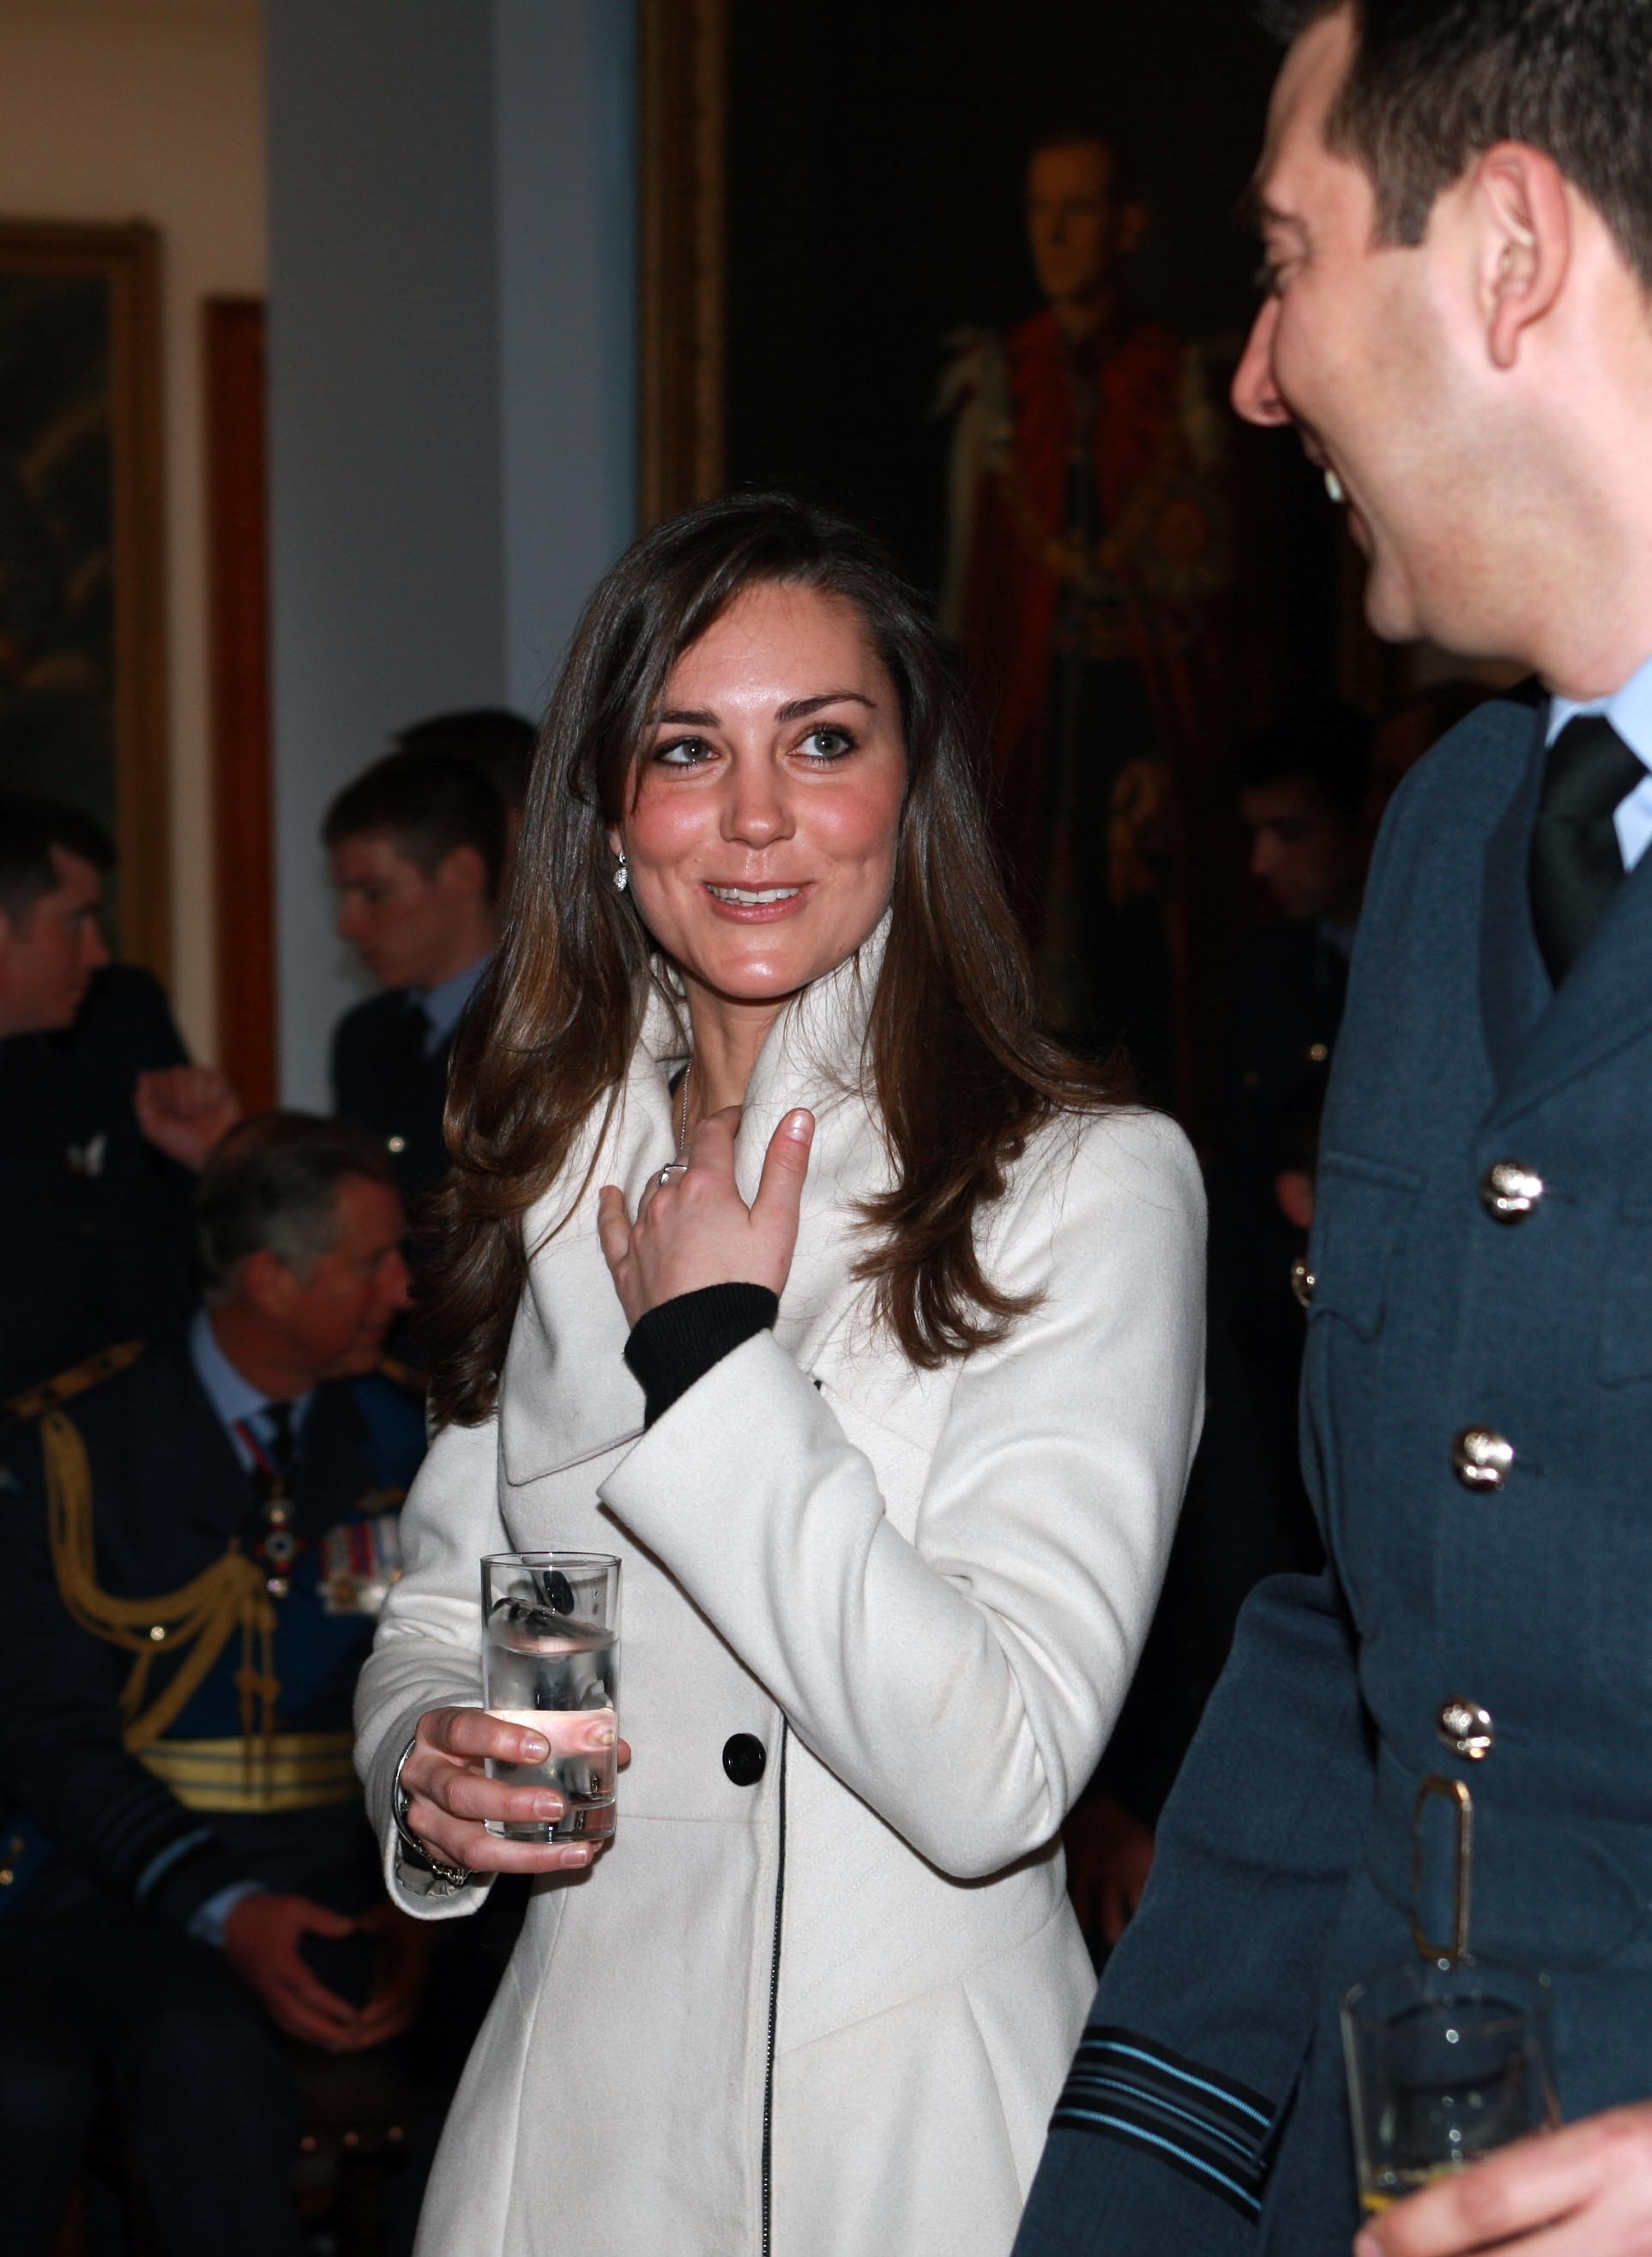 Kate Middleton at Prince William's graduation ceremony at RAF Cranwell on April 11, 2008, in Sleaford, England | Source: Getty Images